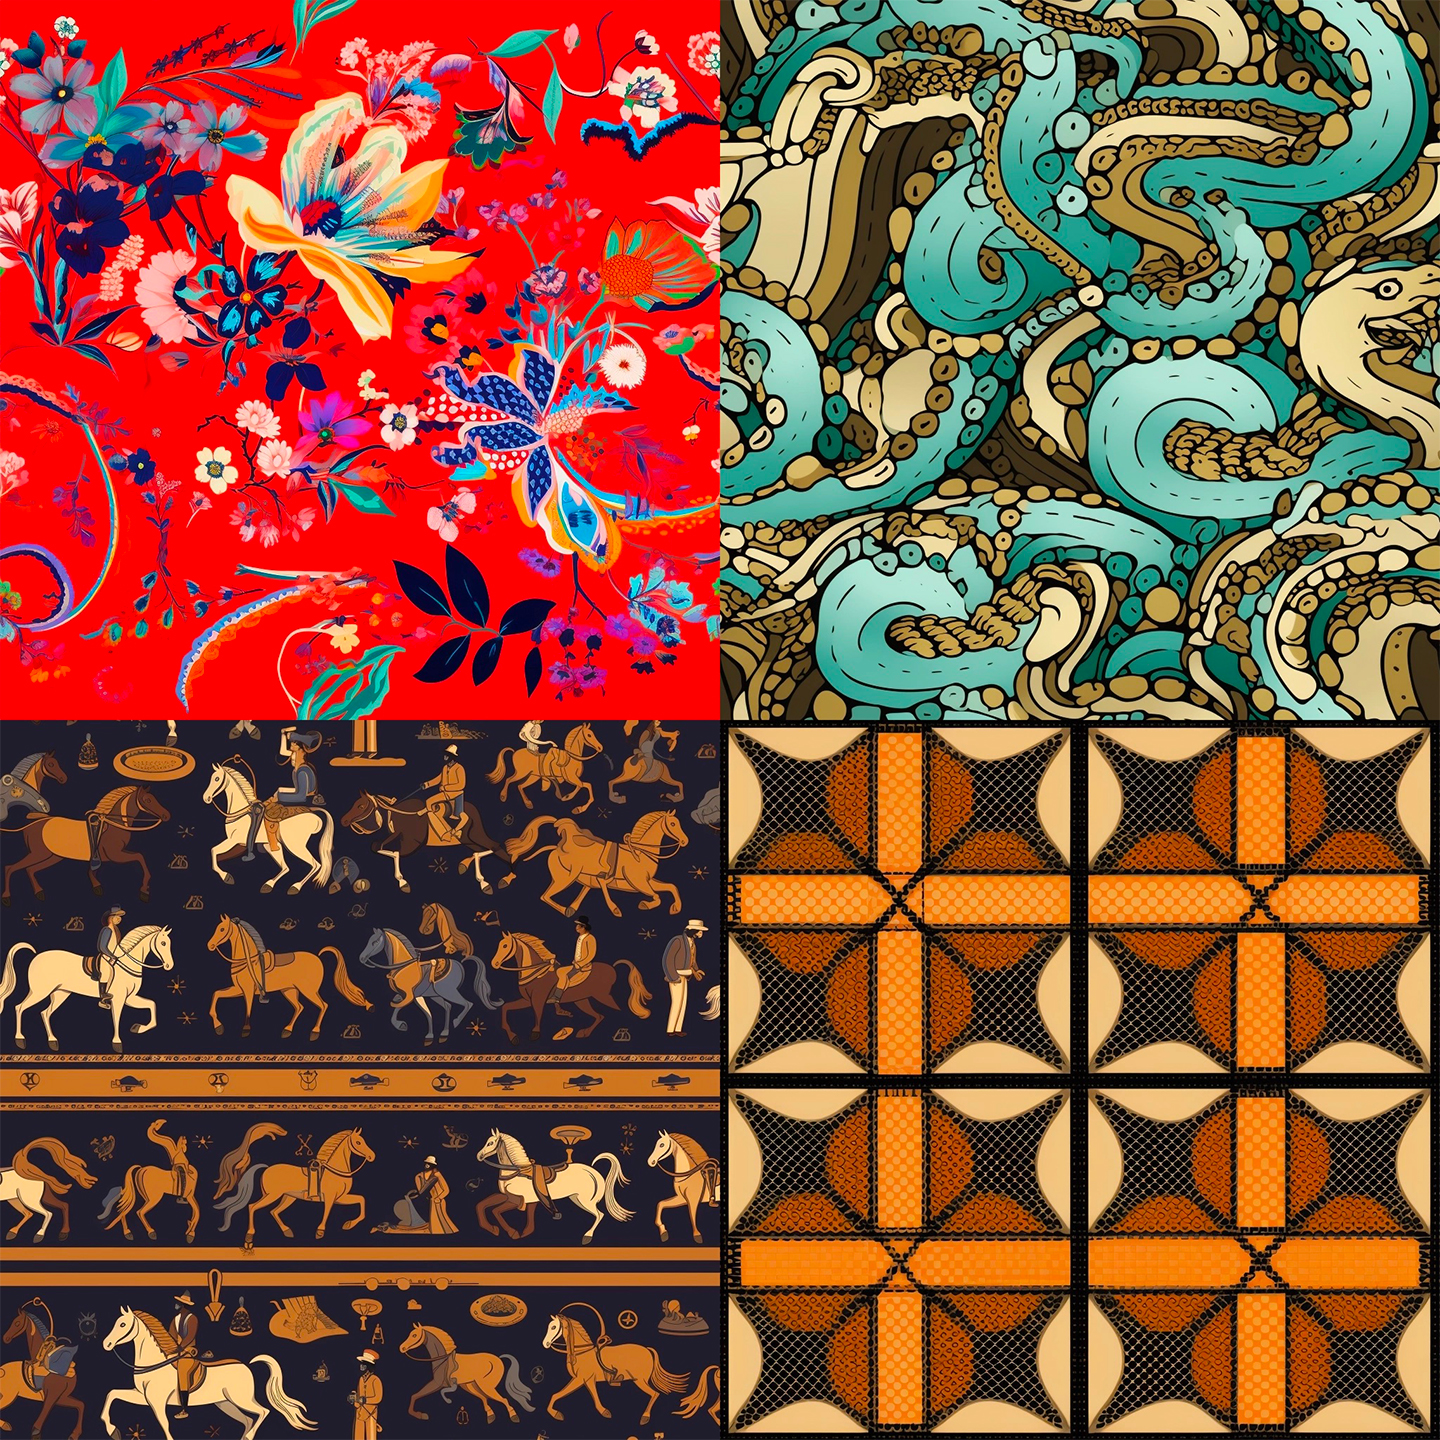 A pattern inspired by Hermès iconic motifs, created with MidJourney